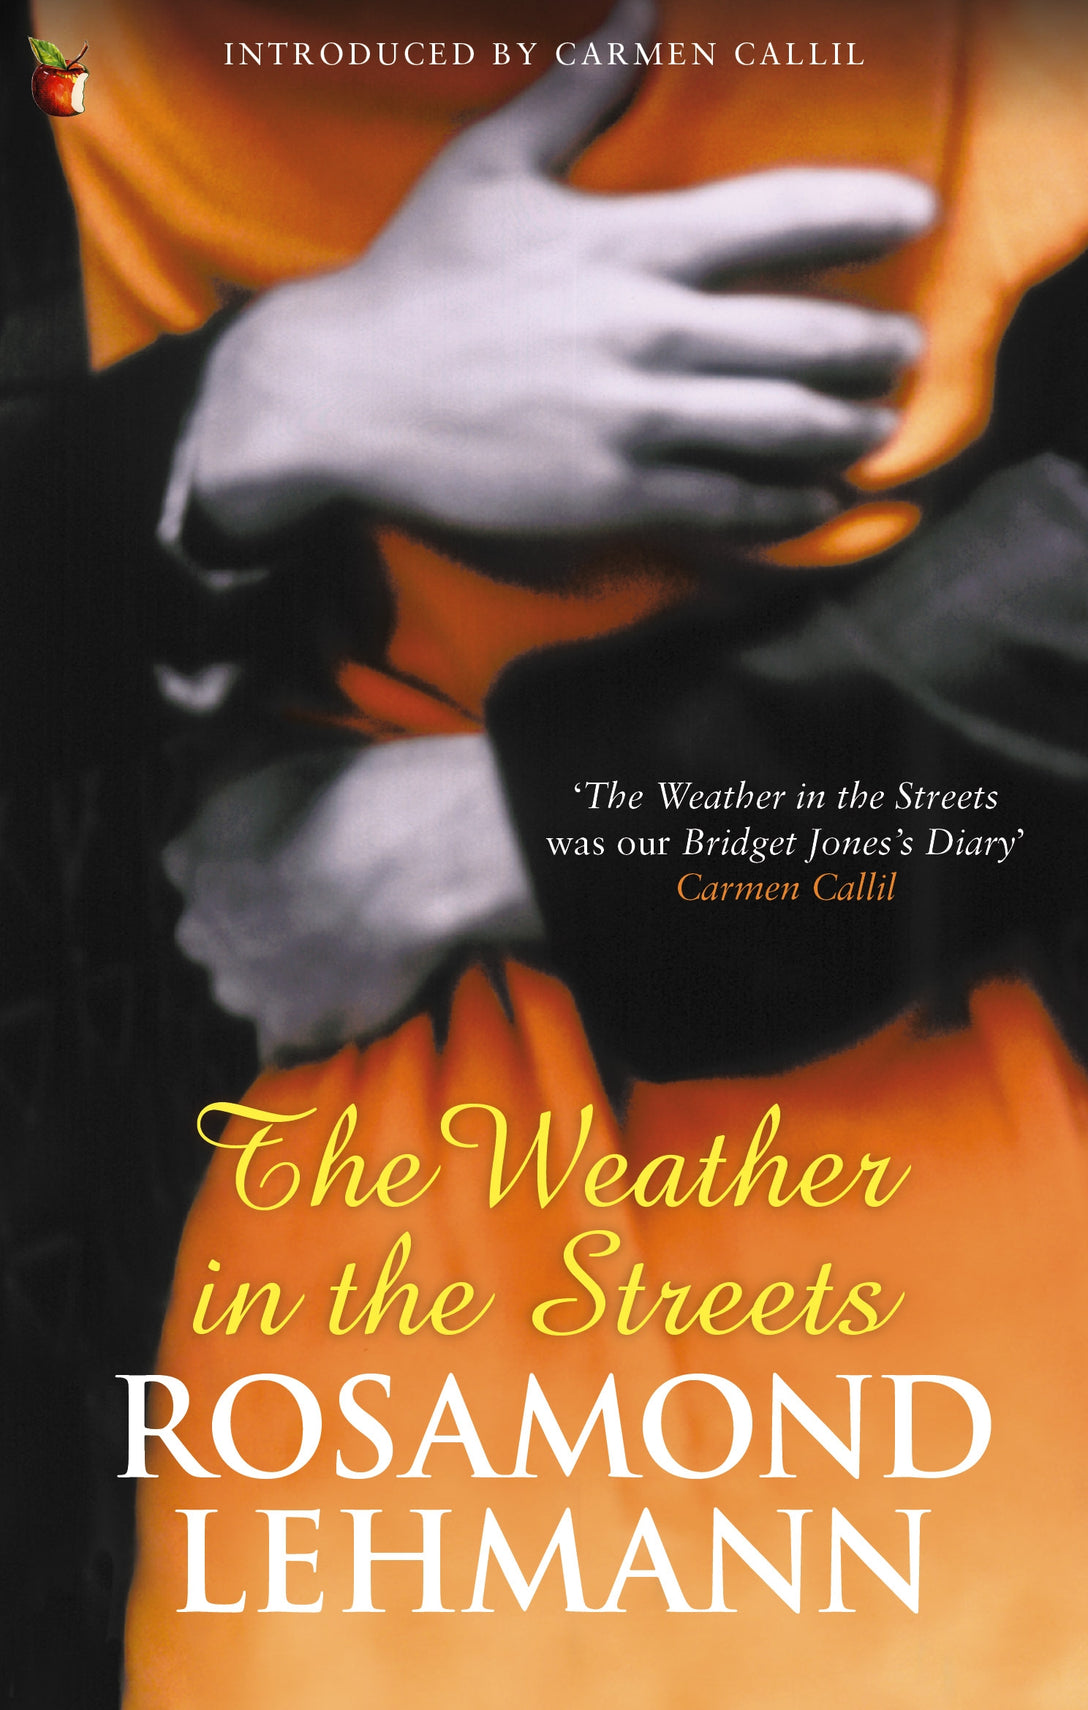 The Weather In The Streets by Rosamond Lehmann